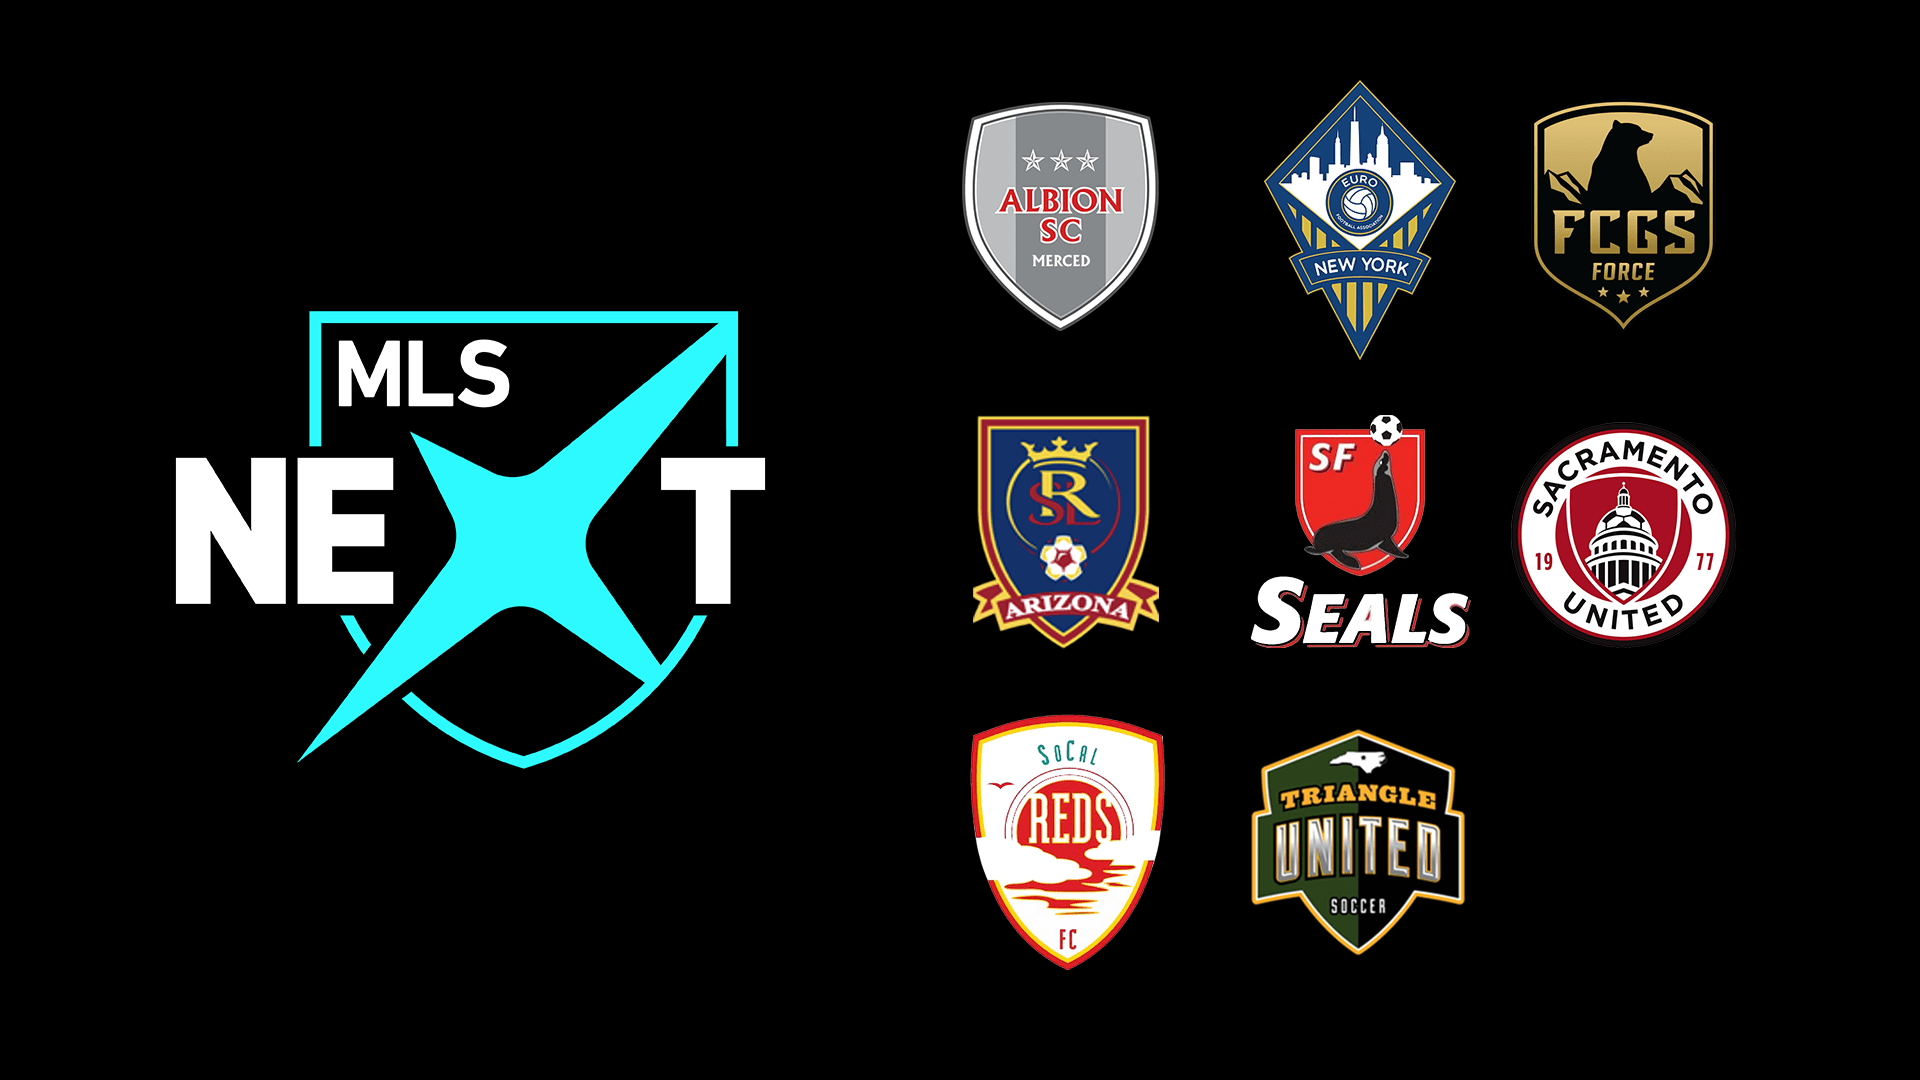 MLS NEXT Pro unveils 21 clubs for inaugural season starting March